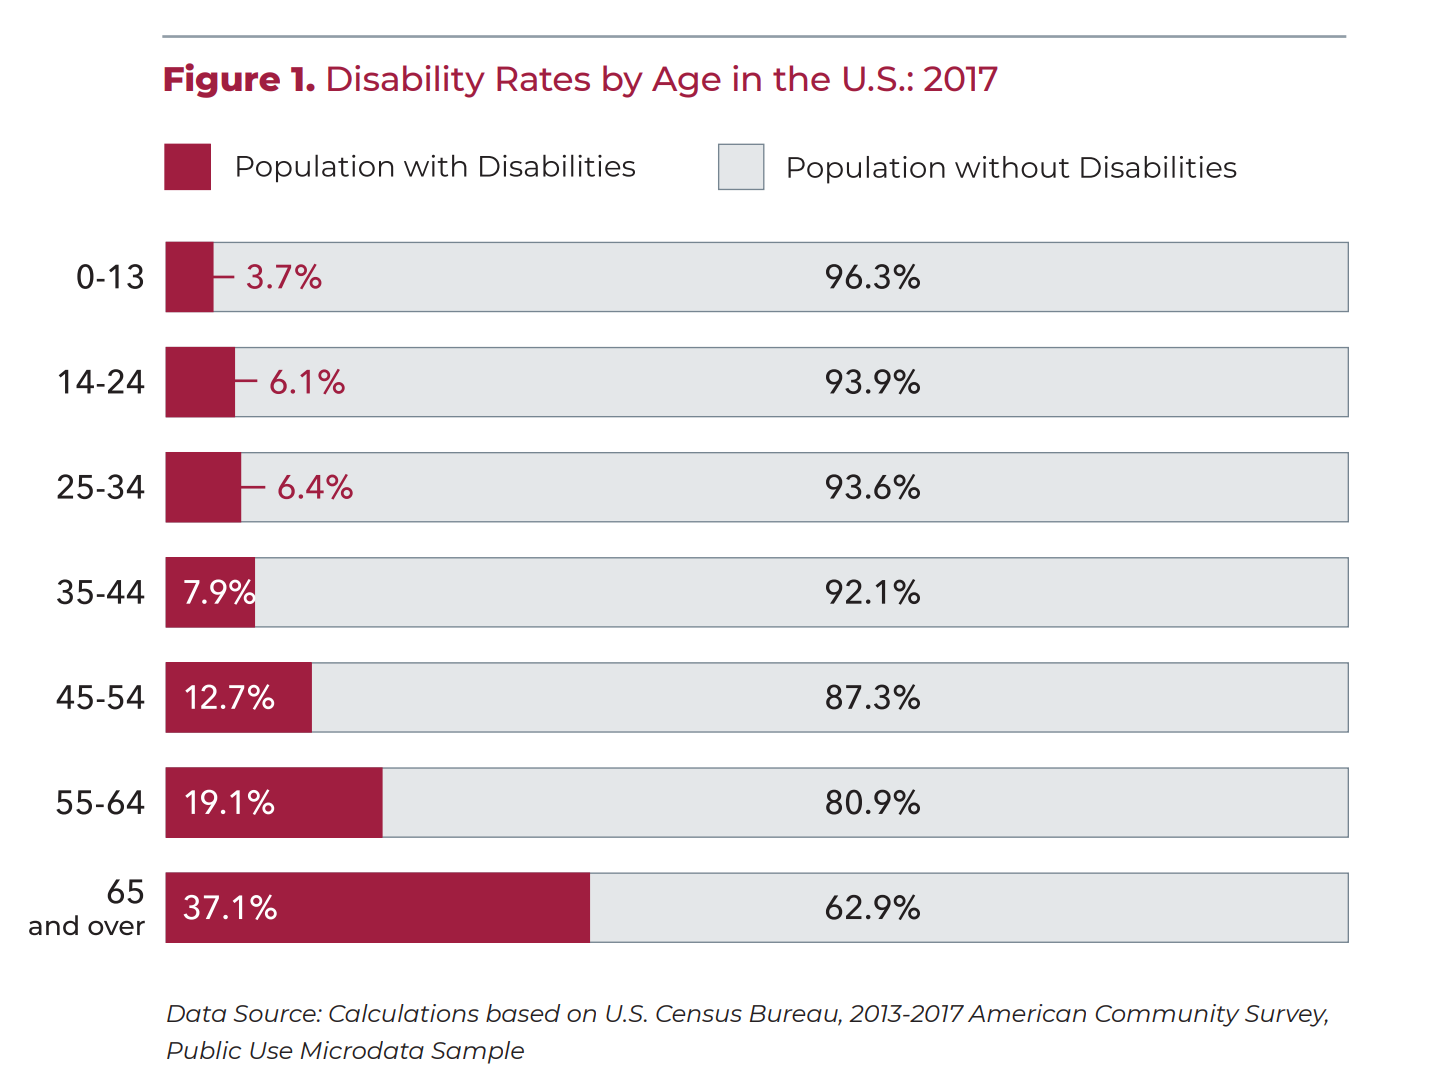 This is a bar graph. Title: Disability Rates by Age in the U.S.: 2017. Data in ascending order. Population with Disabilities: Age 0-13 = 3.7%. Age 14-24 = 6.1%. Age 25-34 = 6.4%. Age 35-44 = 7.9%. Age 45 -54 = 12.7%. Age 55-64 = 19.1%. 65 and over = 35.1%. Data Source: Calculations based on U.S. Census Bureau, 2013-2017 American Community Survey, Public Use Microdata Sample